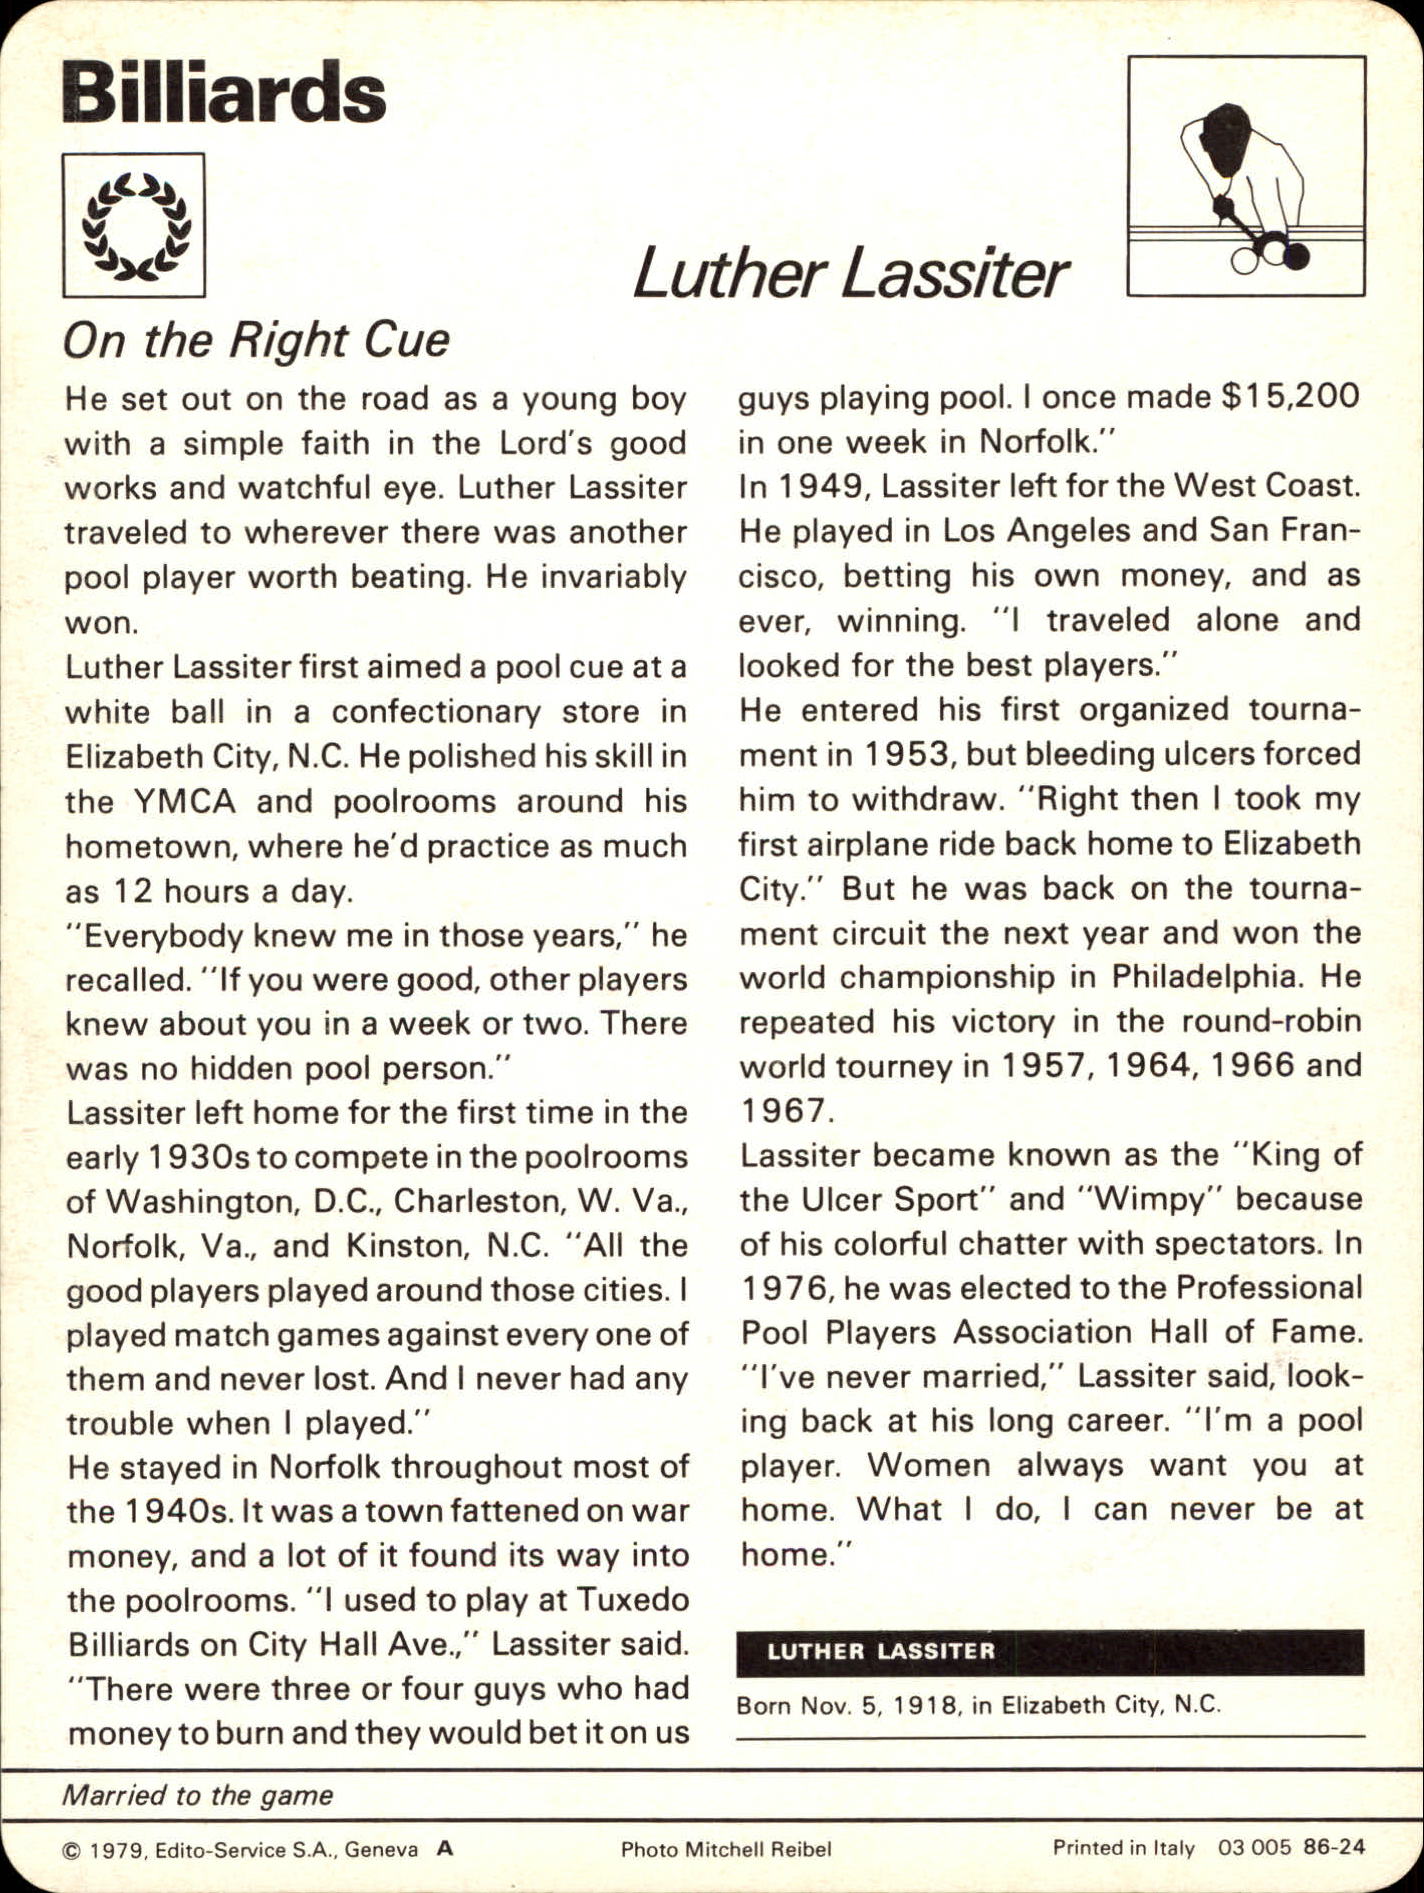 Luther Wimpy Lassiter Sportscaster Card - On the Right Cue - Back